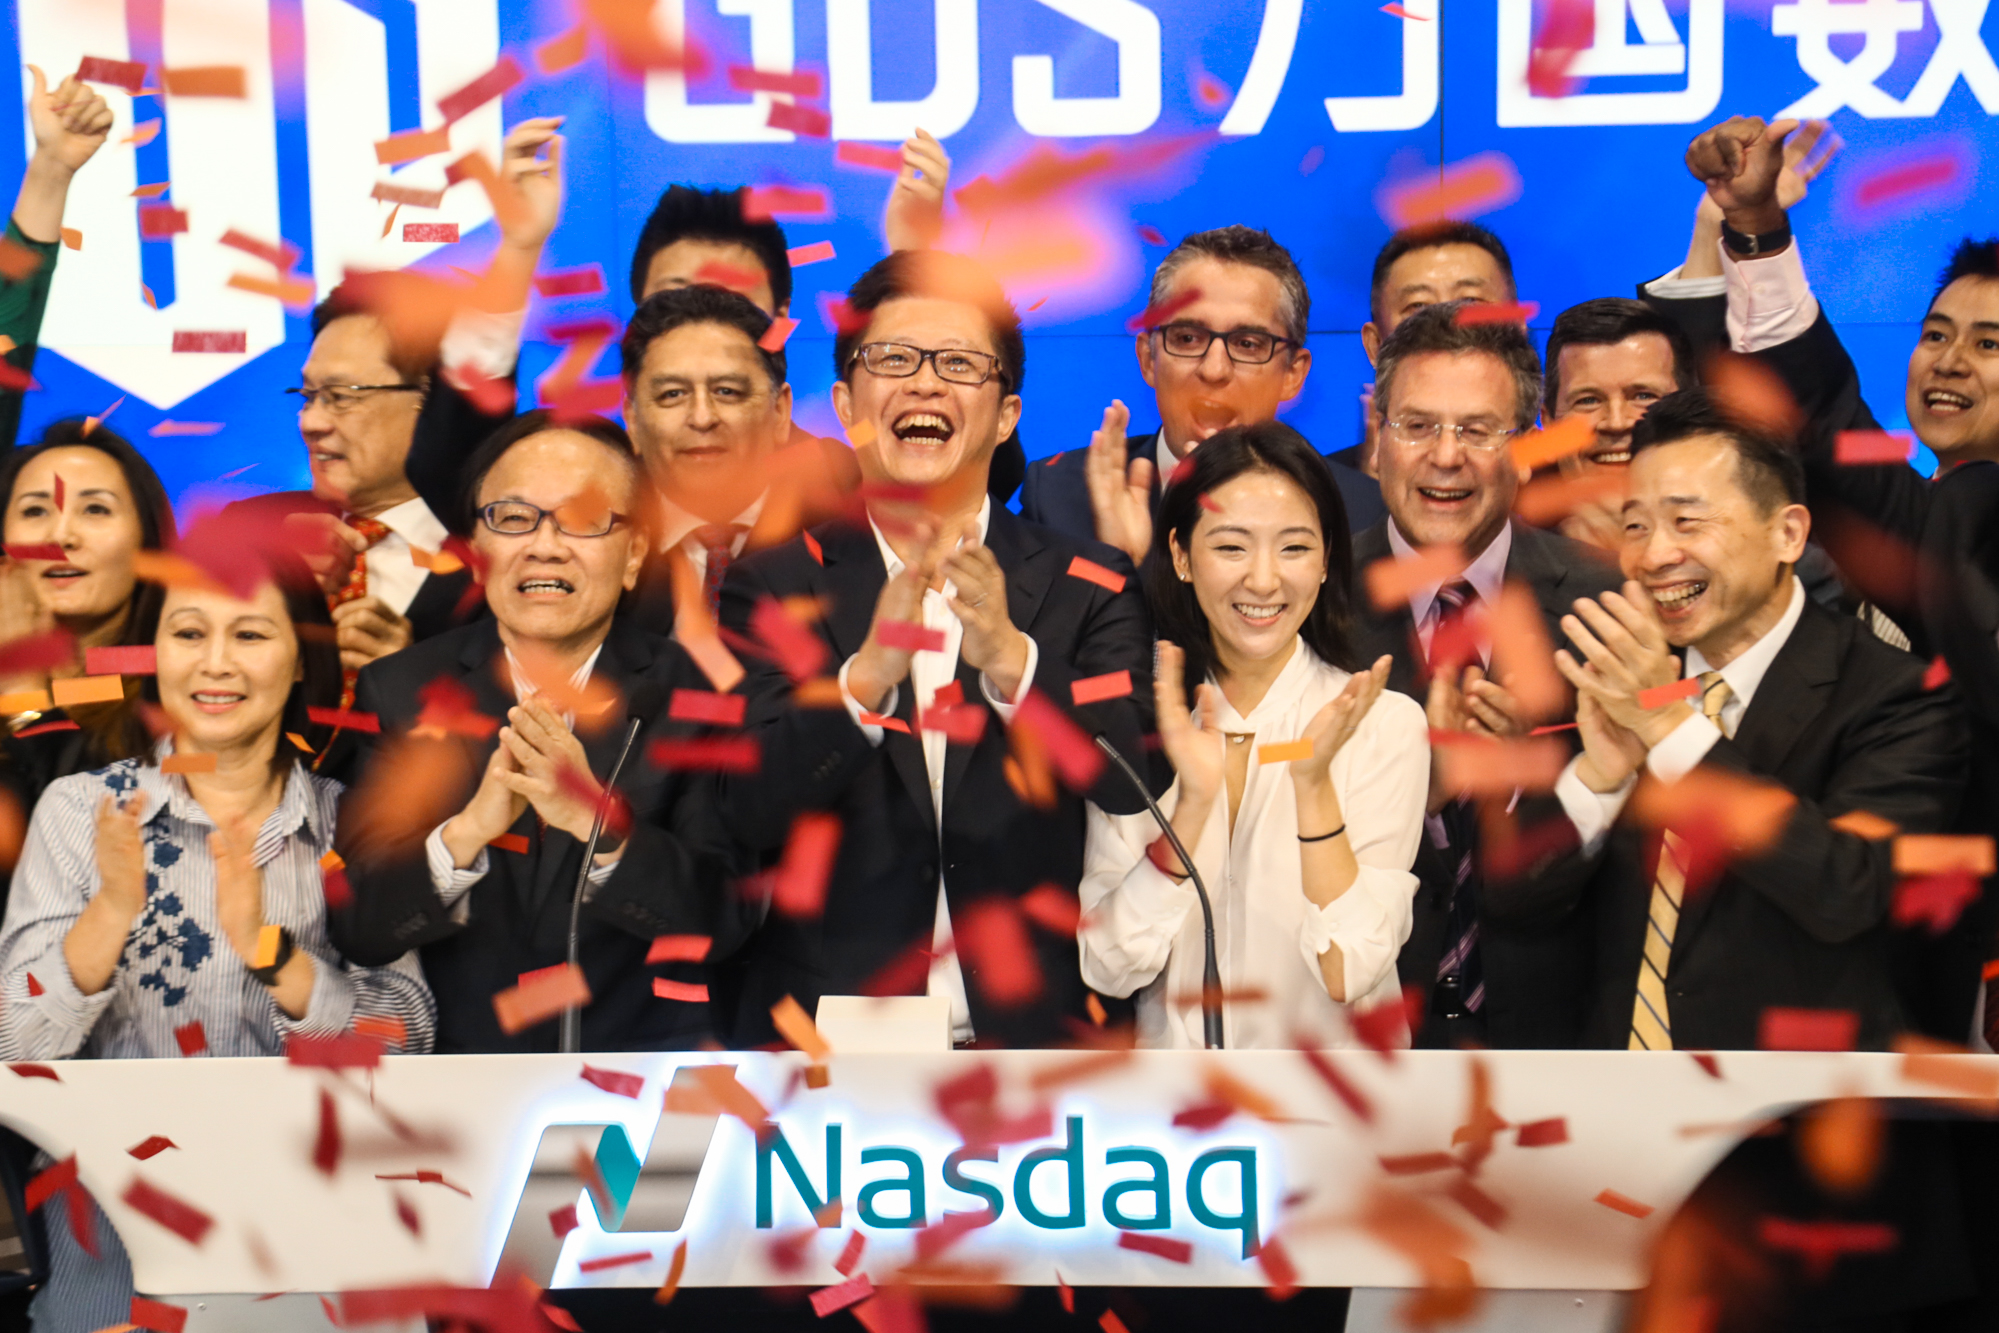 GDS Holdings Ltd. (Nasdaq: GDS) Rings The Nasdaq Stock Market Opening Bell in Celebration of its IPO